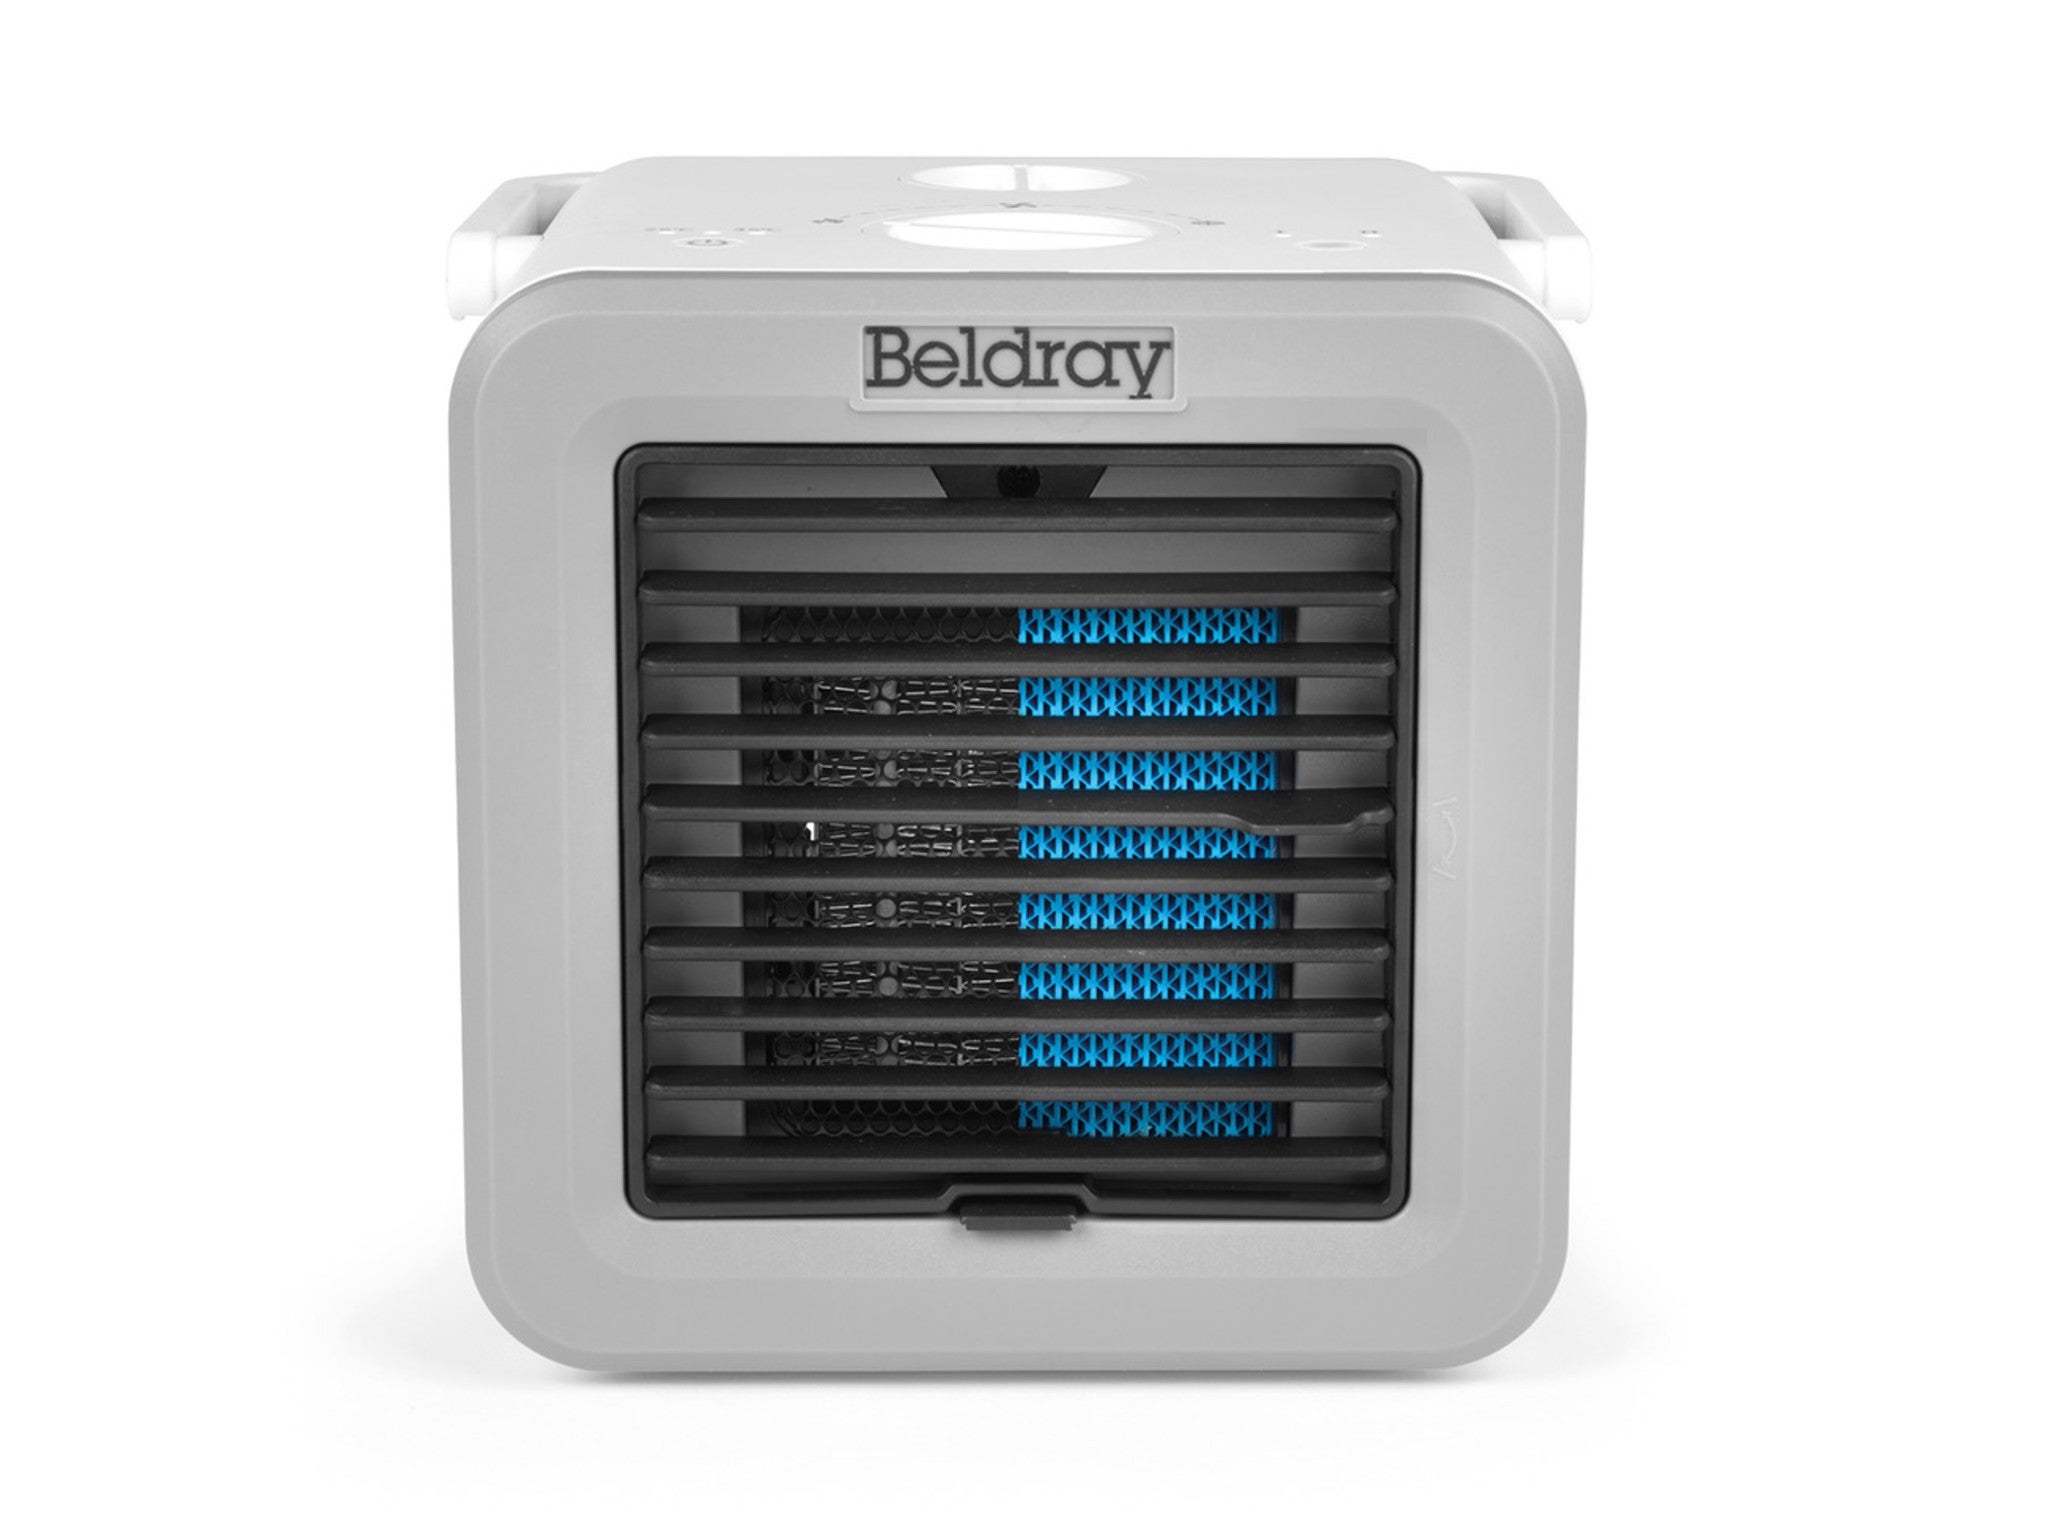 Beldray climate cube indybest